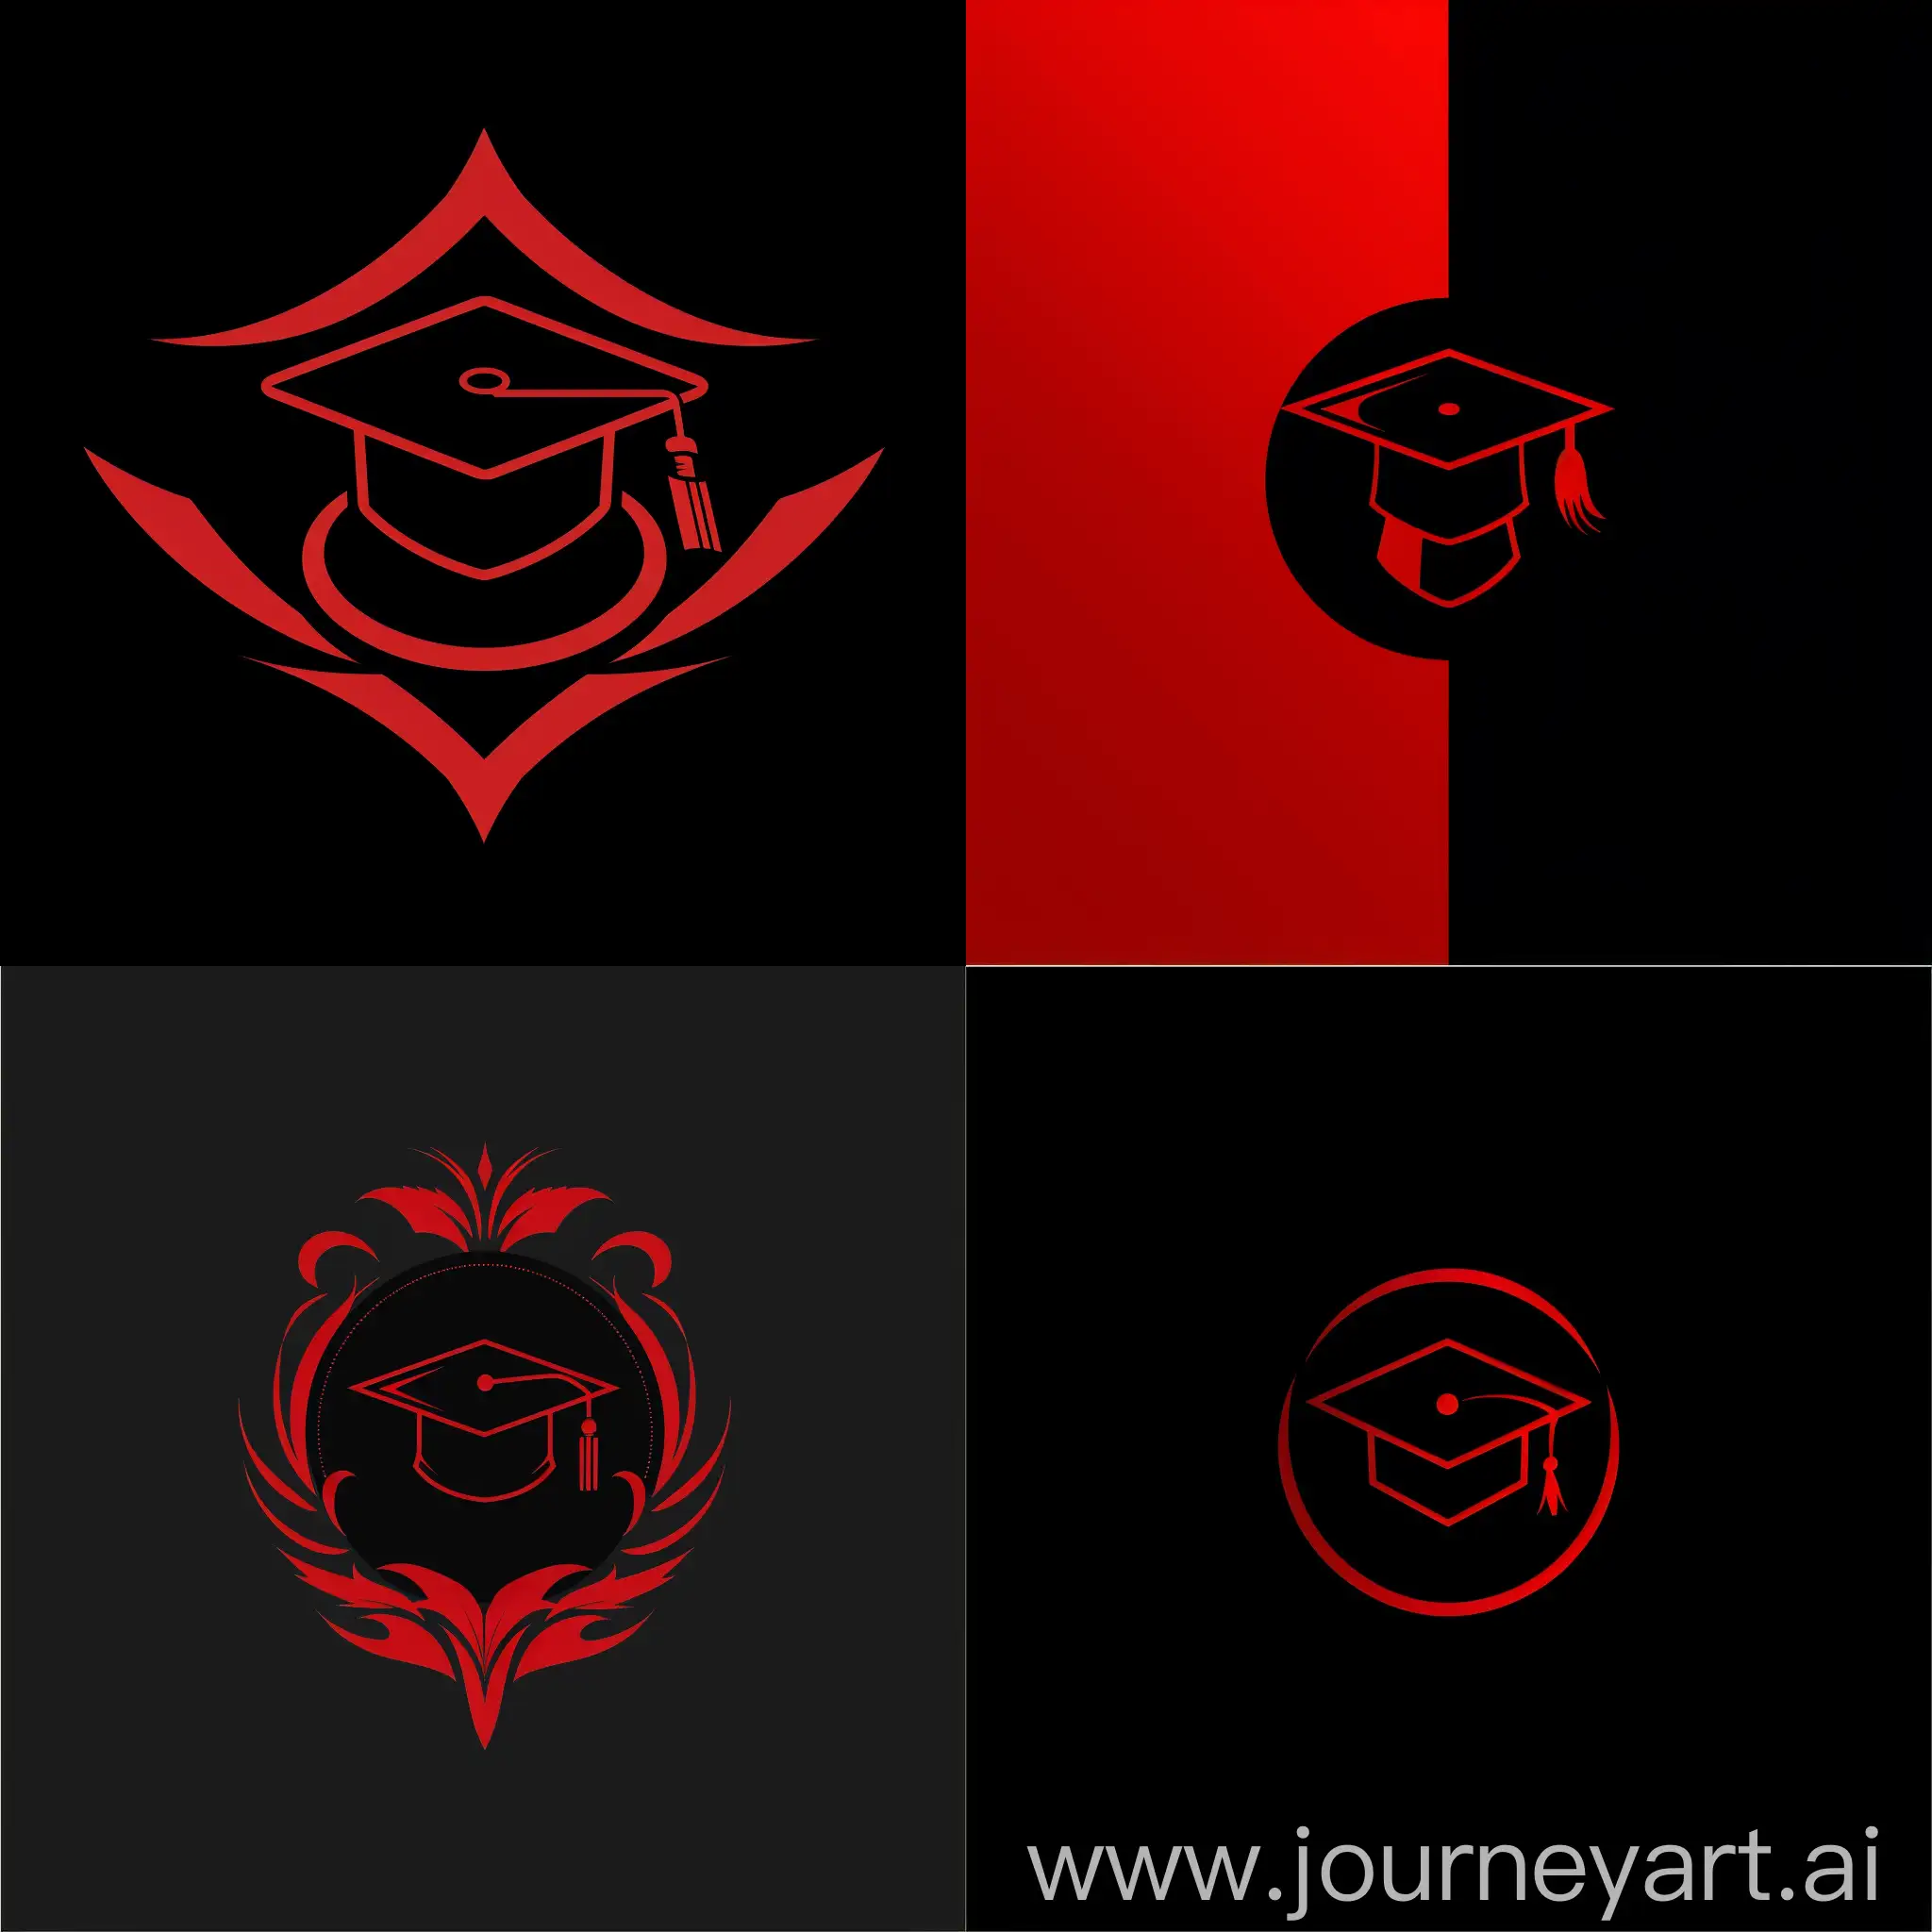 Create a black and red logo with an academic cap in the center